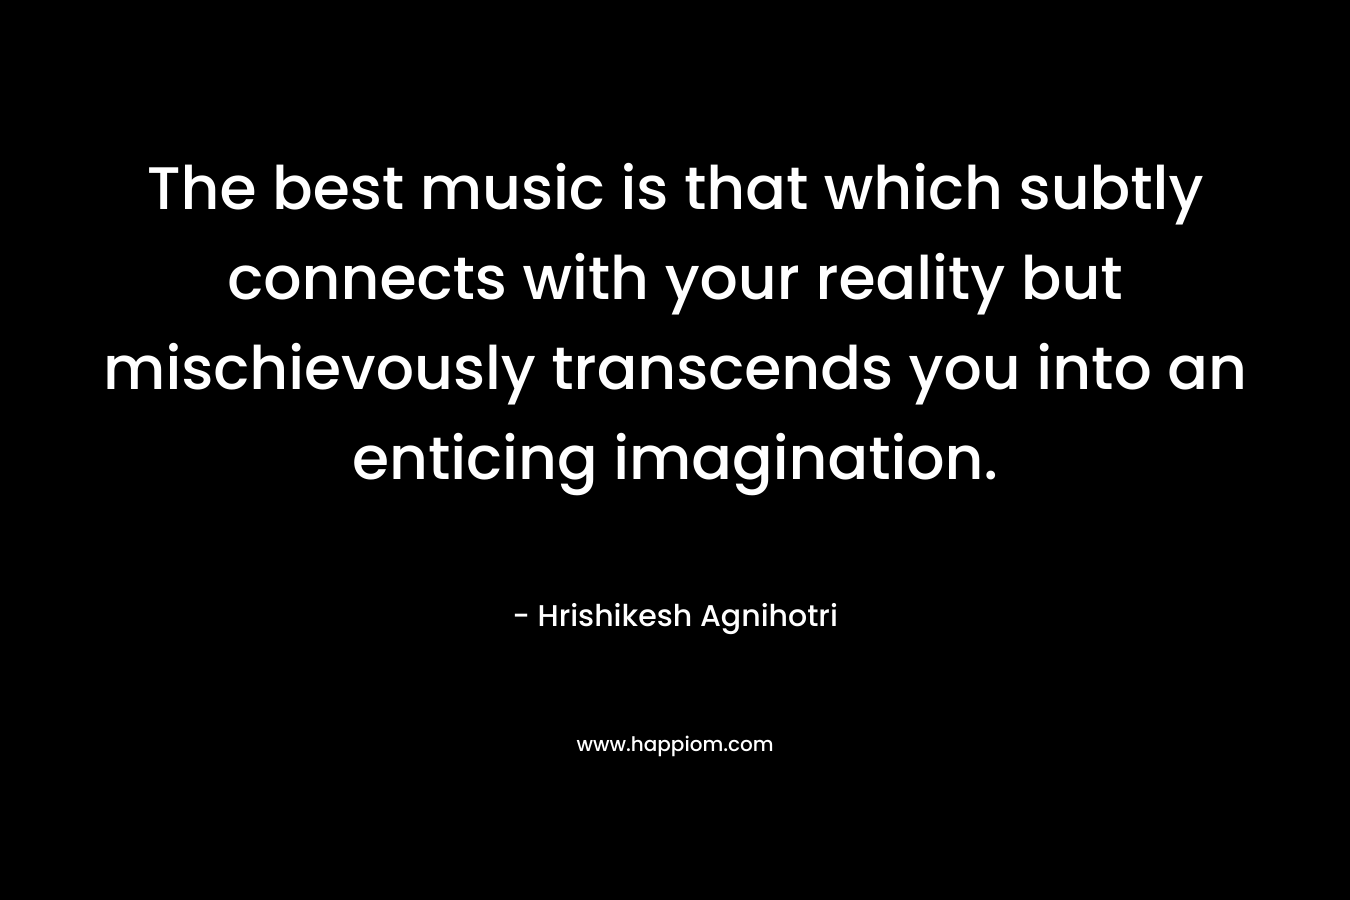 The best music is that which subtly connects with your reality but mischievously transcends you into an enticing imagination.